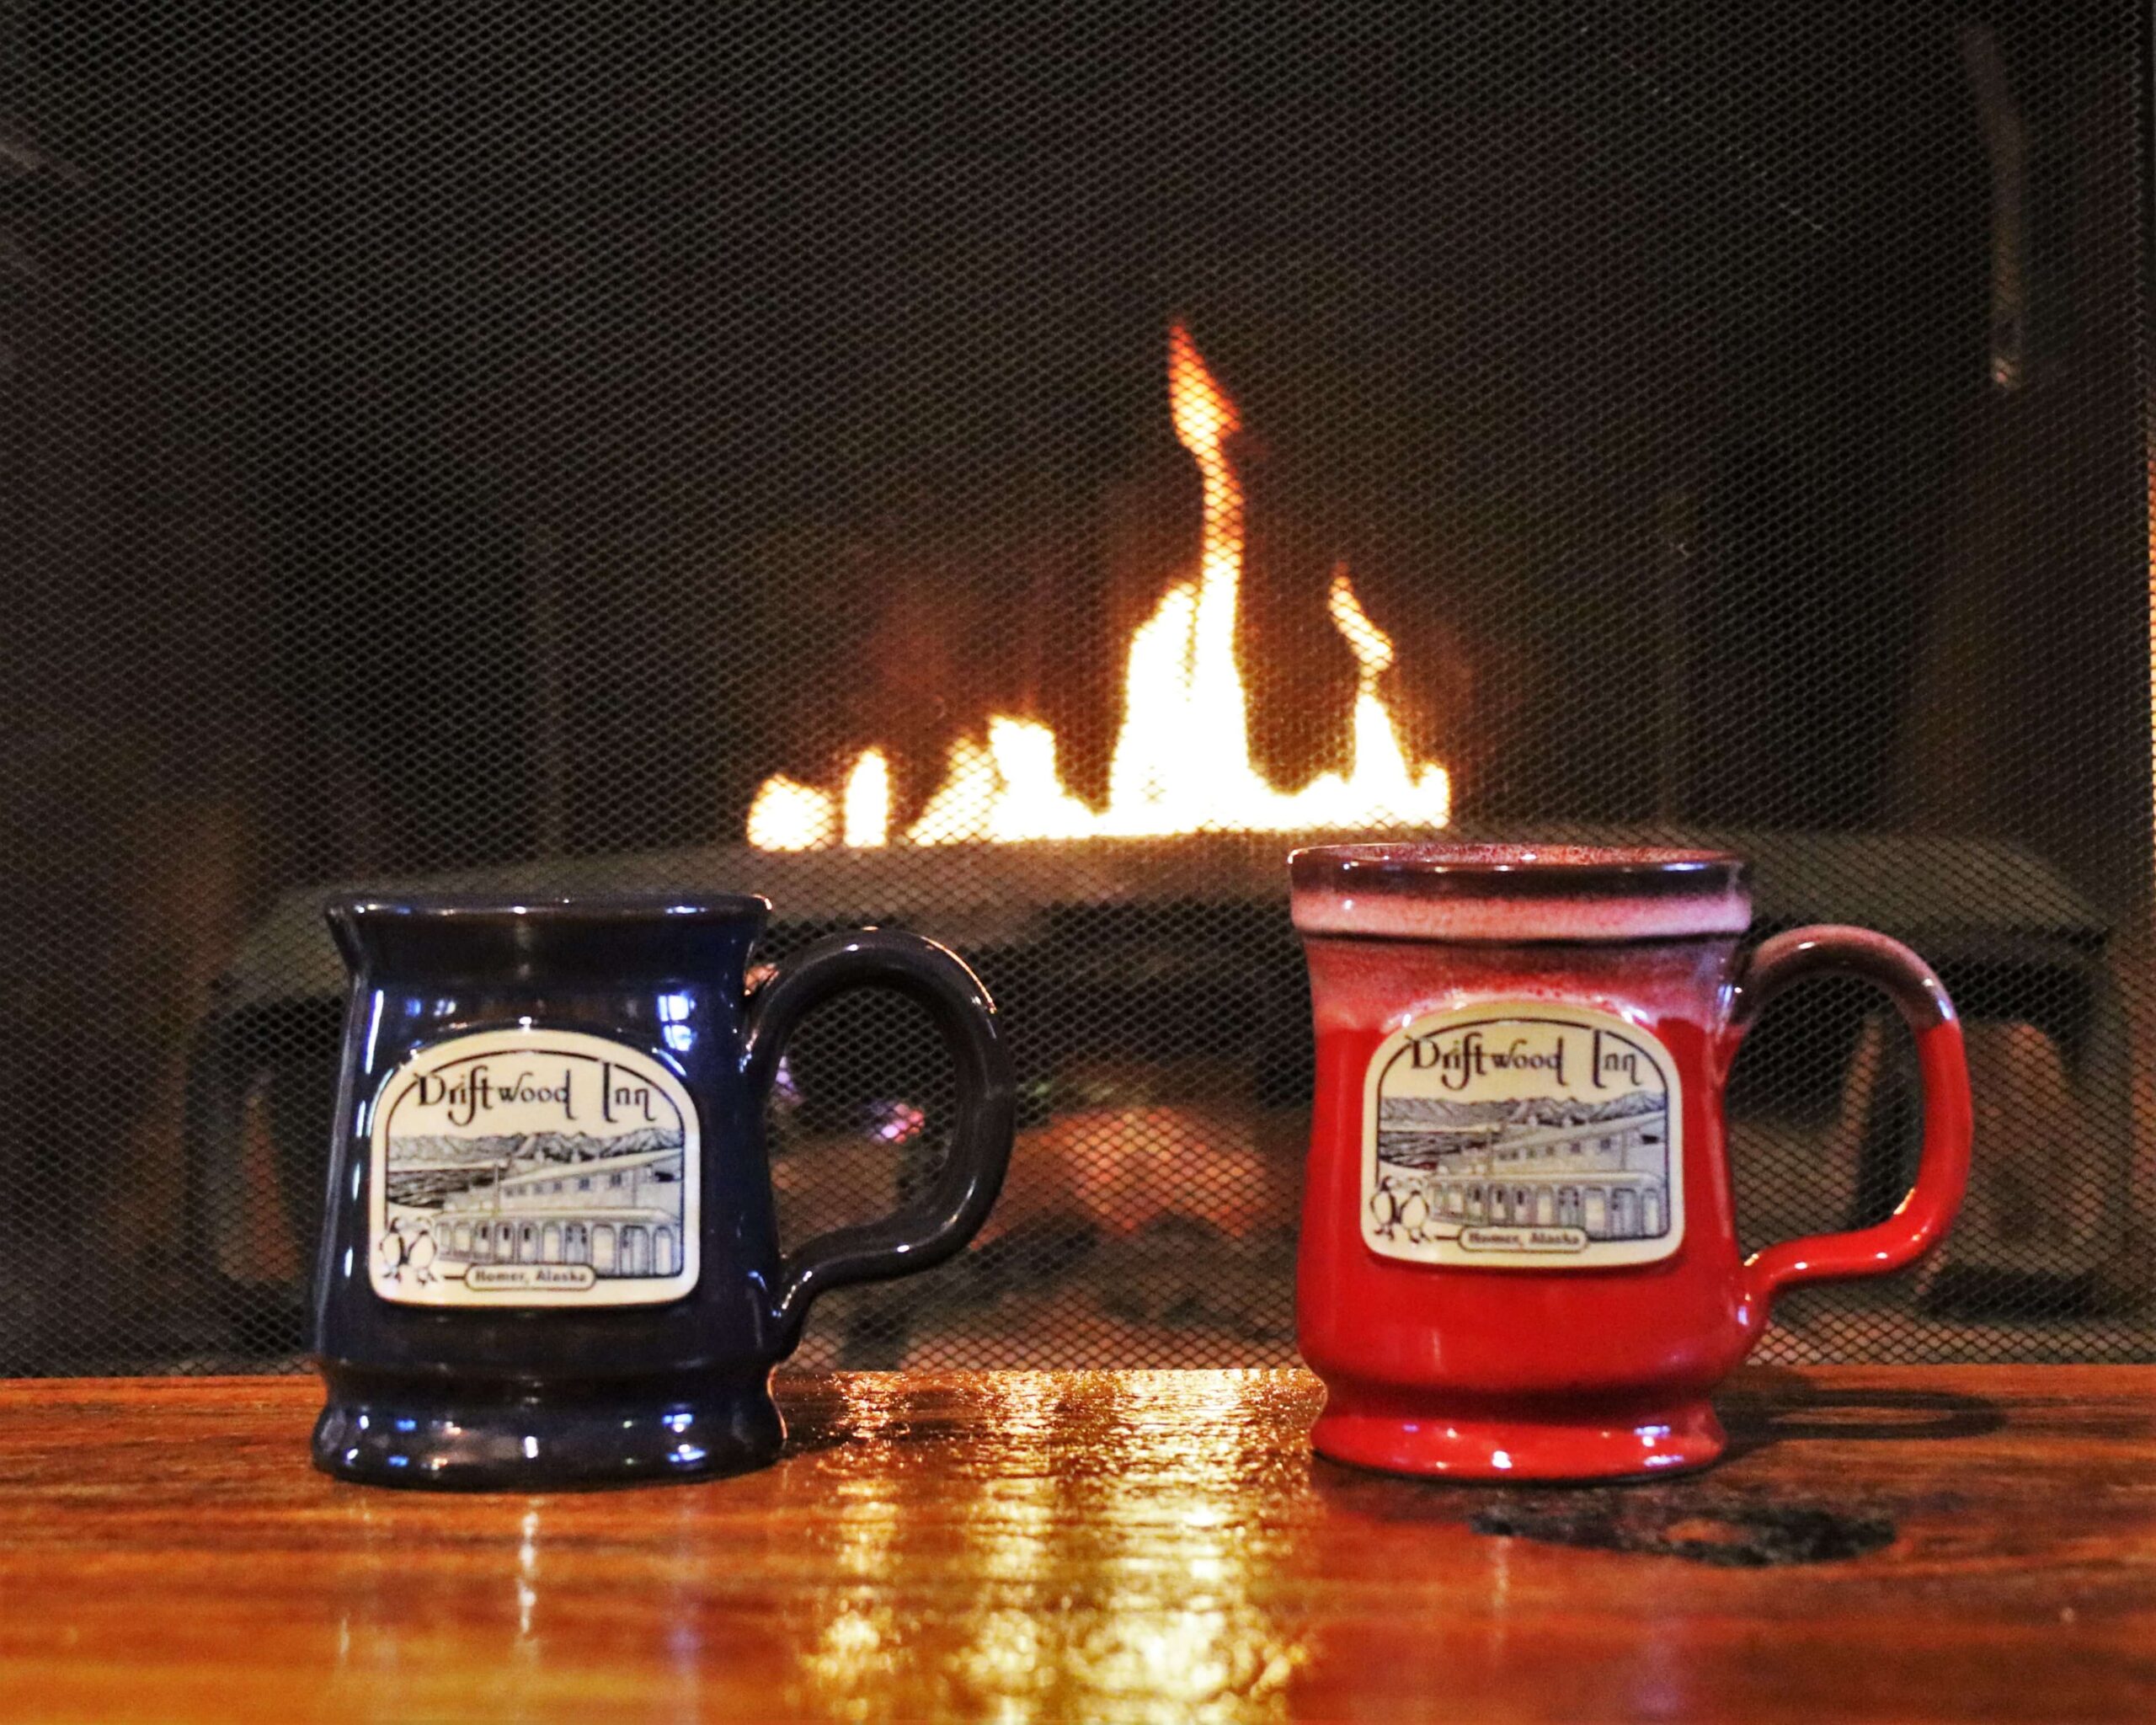 red and blue mugs sitting on table in front of fireplace